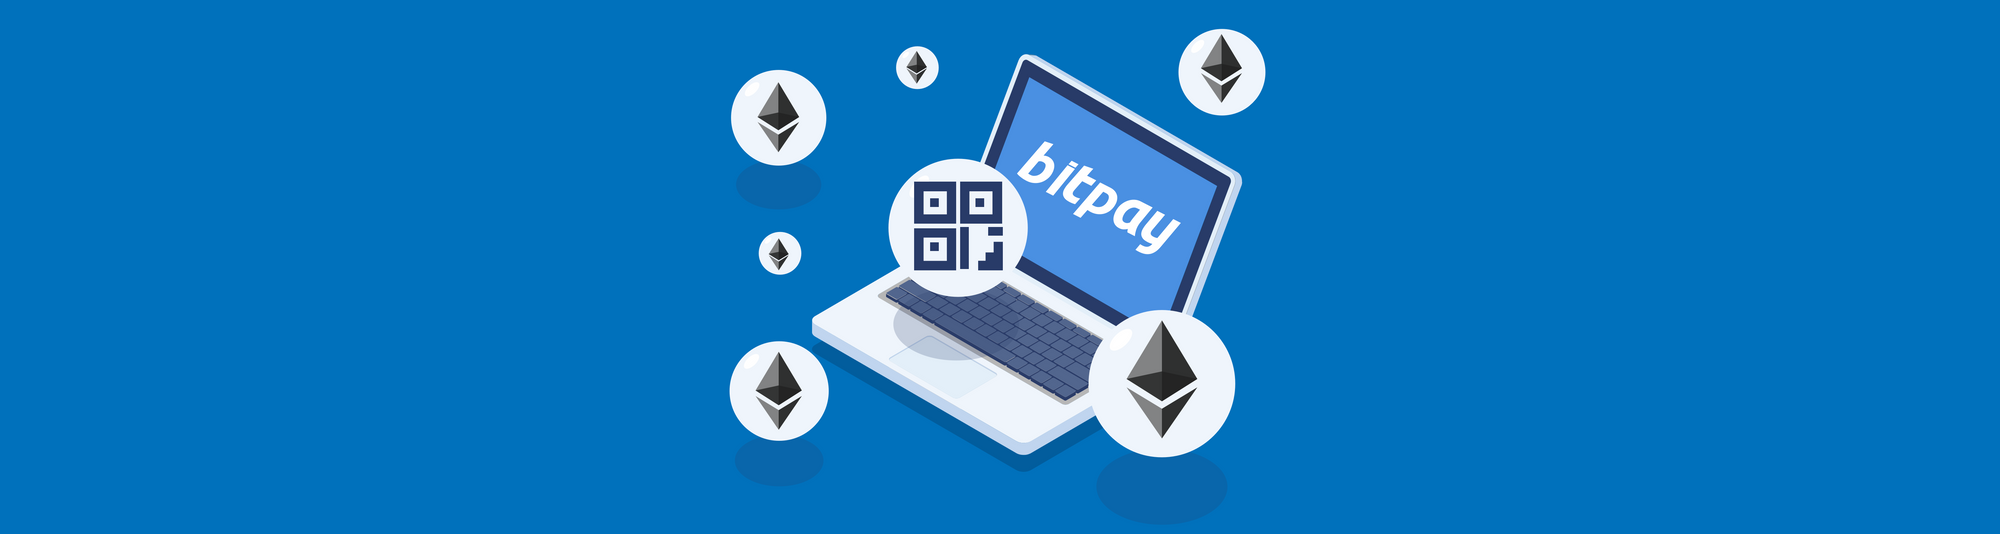 BitPay Will Soon Support Payments from the Ethereum Blockchain